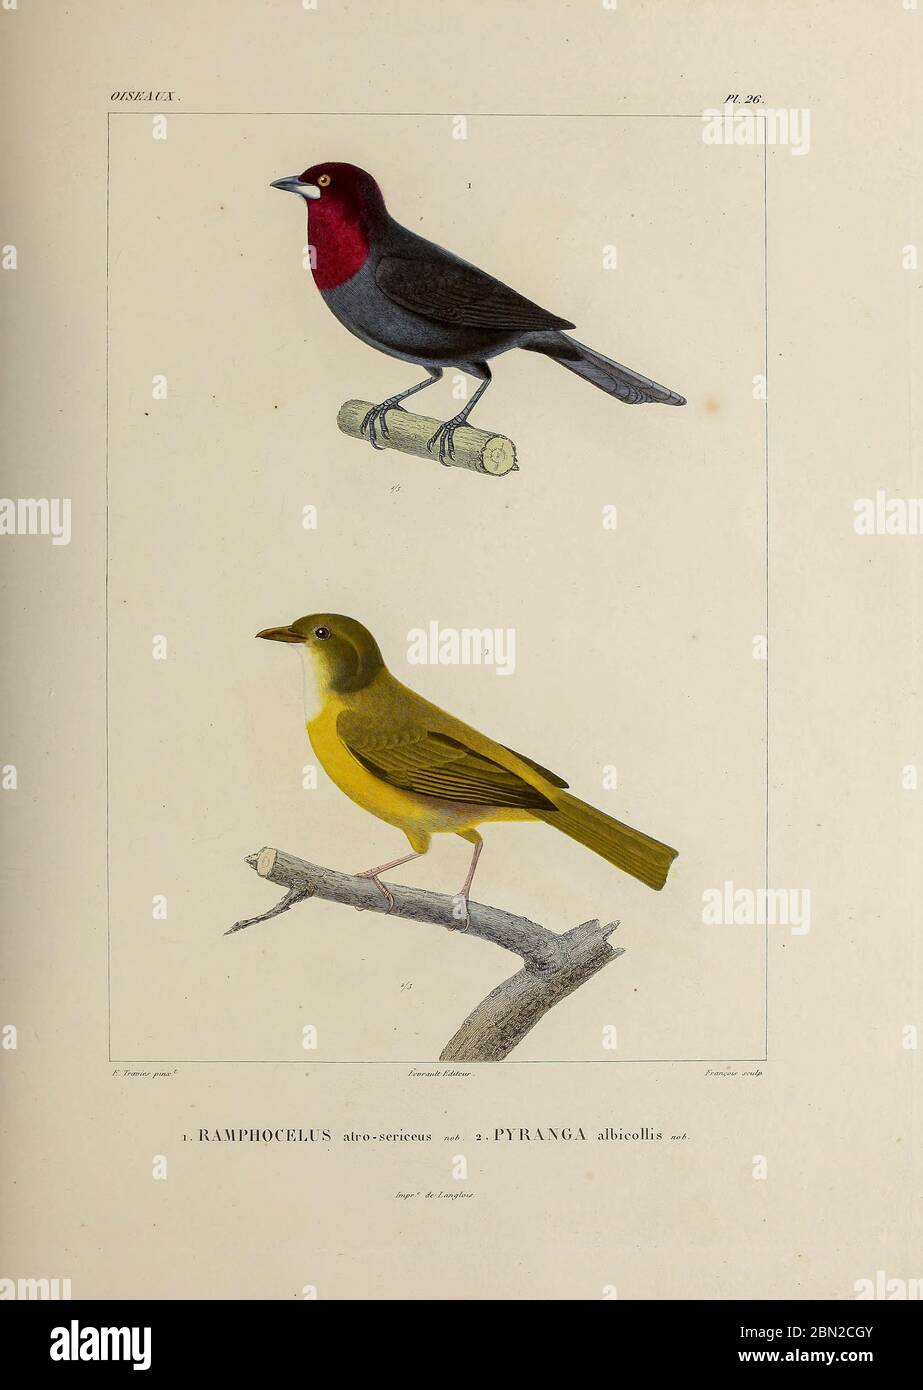 hand coloured sketch Top: silver-beaked tanager (Ramphocelus carbo [Here as Ramphocelus atro-sericeus]) Bottom: grey-headed tanager (Eucometis penicillata) [Here as Pyranga albicollis]) From the book 'Voyage dans l'Amérique Méridionale' [Journey to South America: (Brazil, the eastern republic of Uruguay, the Argentine Republic, Patagonia, the republic of Chile, the republic of Bolivia, the republic of Peru), executed during the years 1826 - 1833] 4th volume Part 3 By: Orbigny, Alcide Dessalines d', d'Orbigny, 1802-1857; Montagne, Jean François Camille, 1784-1866; Martius, Karl Friedrich Phili Stock Photo